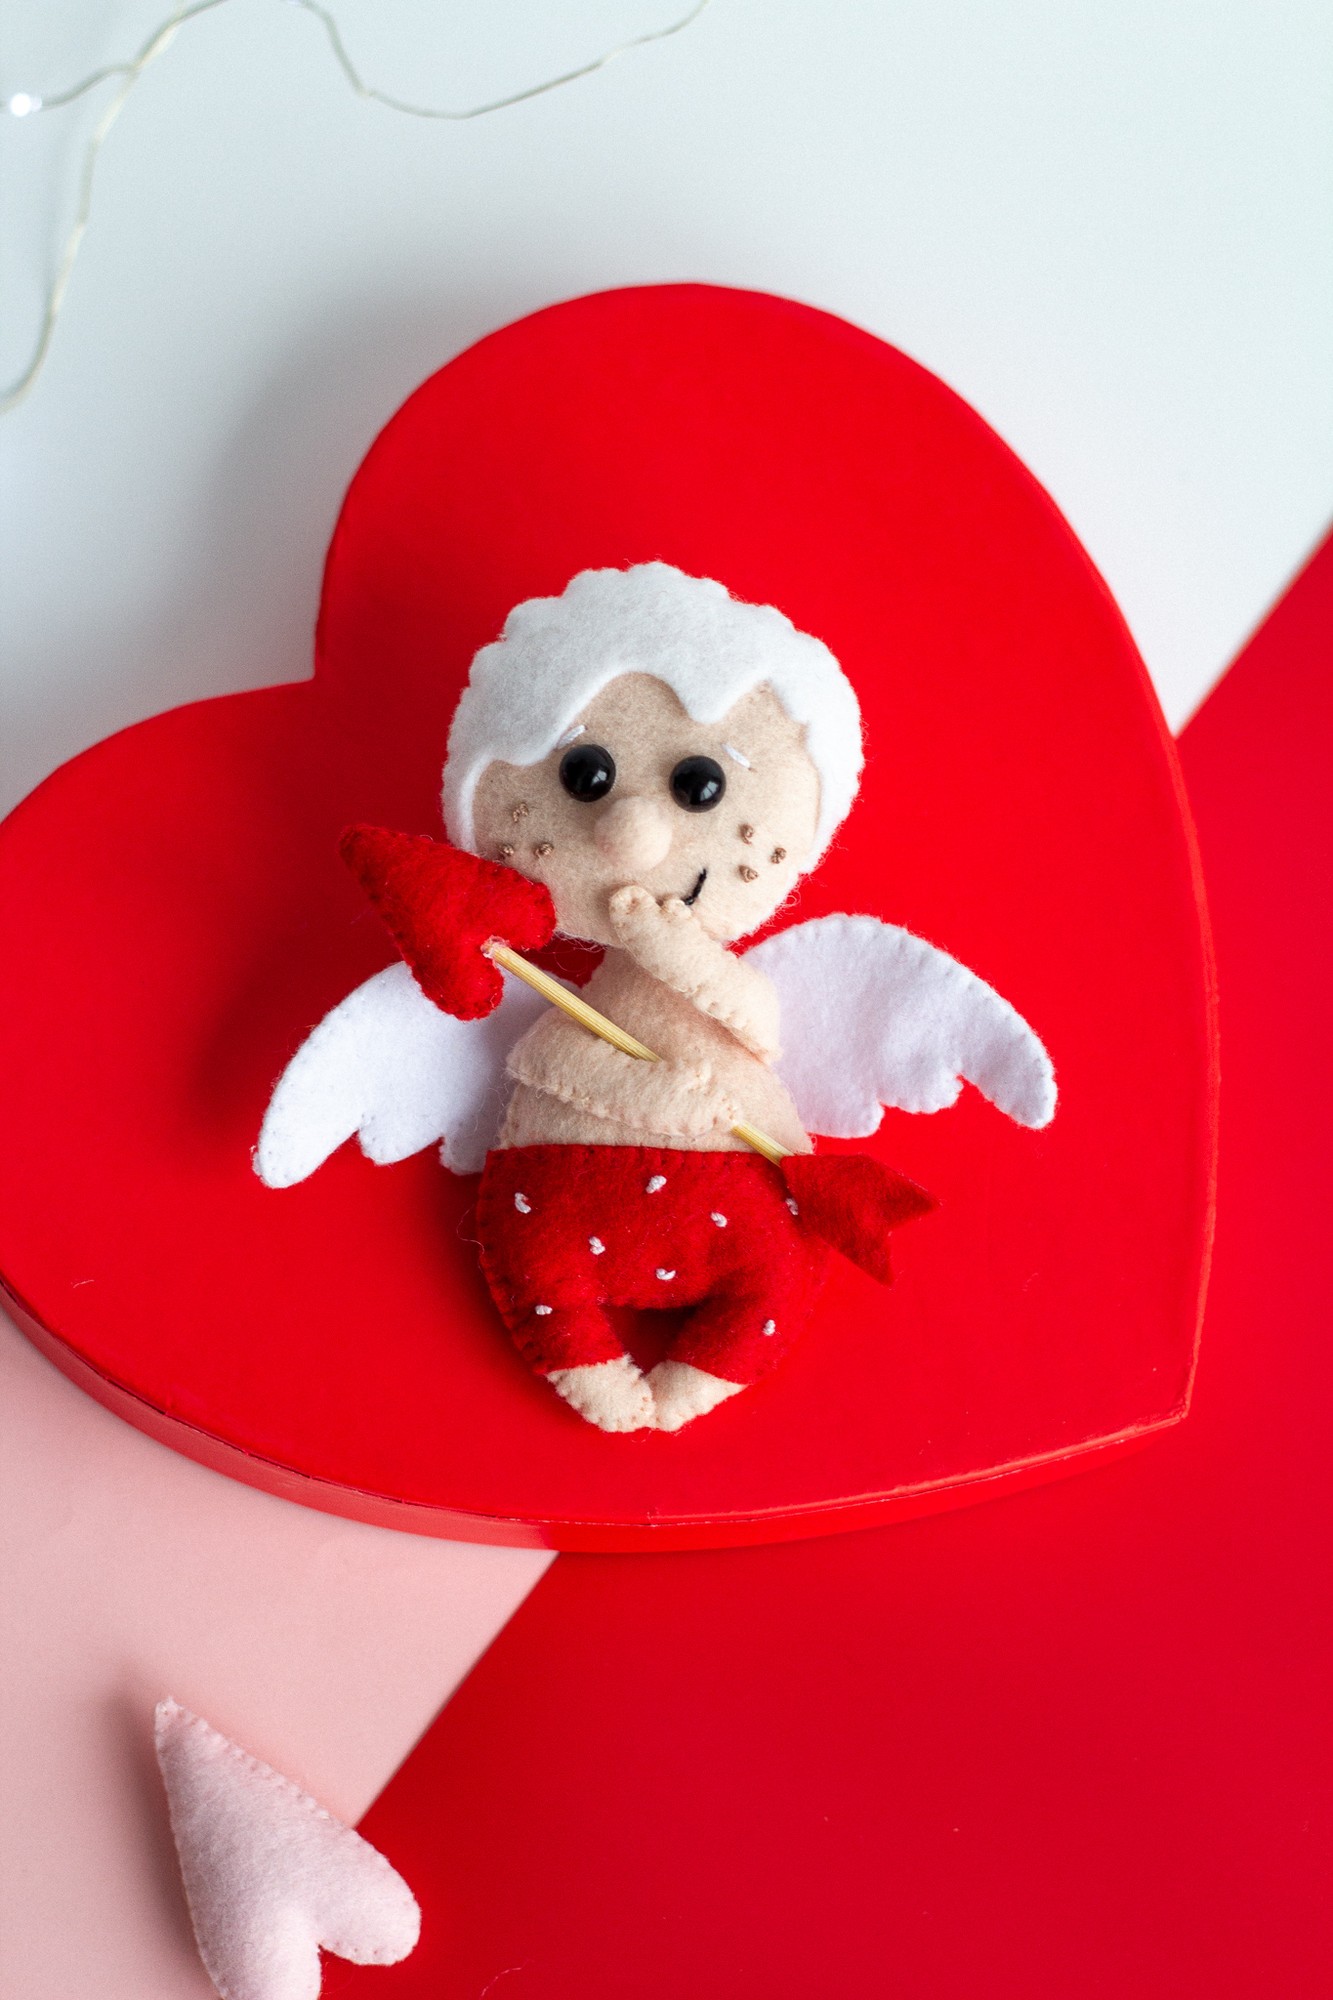 Cute Cupid with an arrow Valentine's Day gift